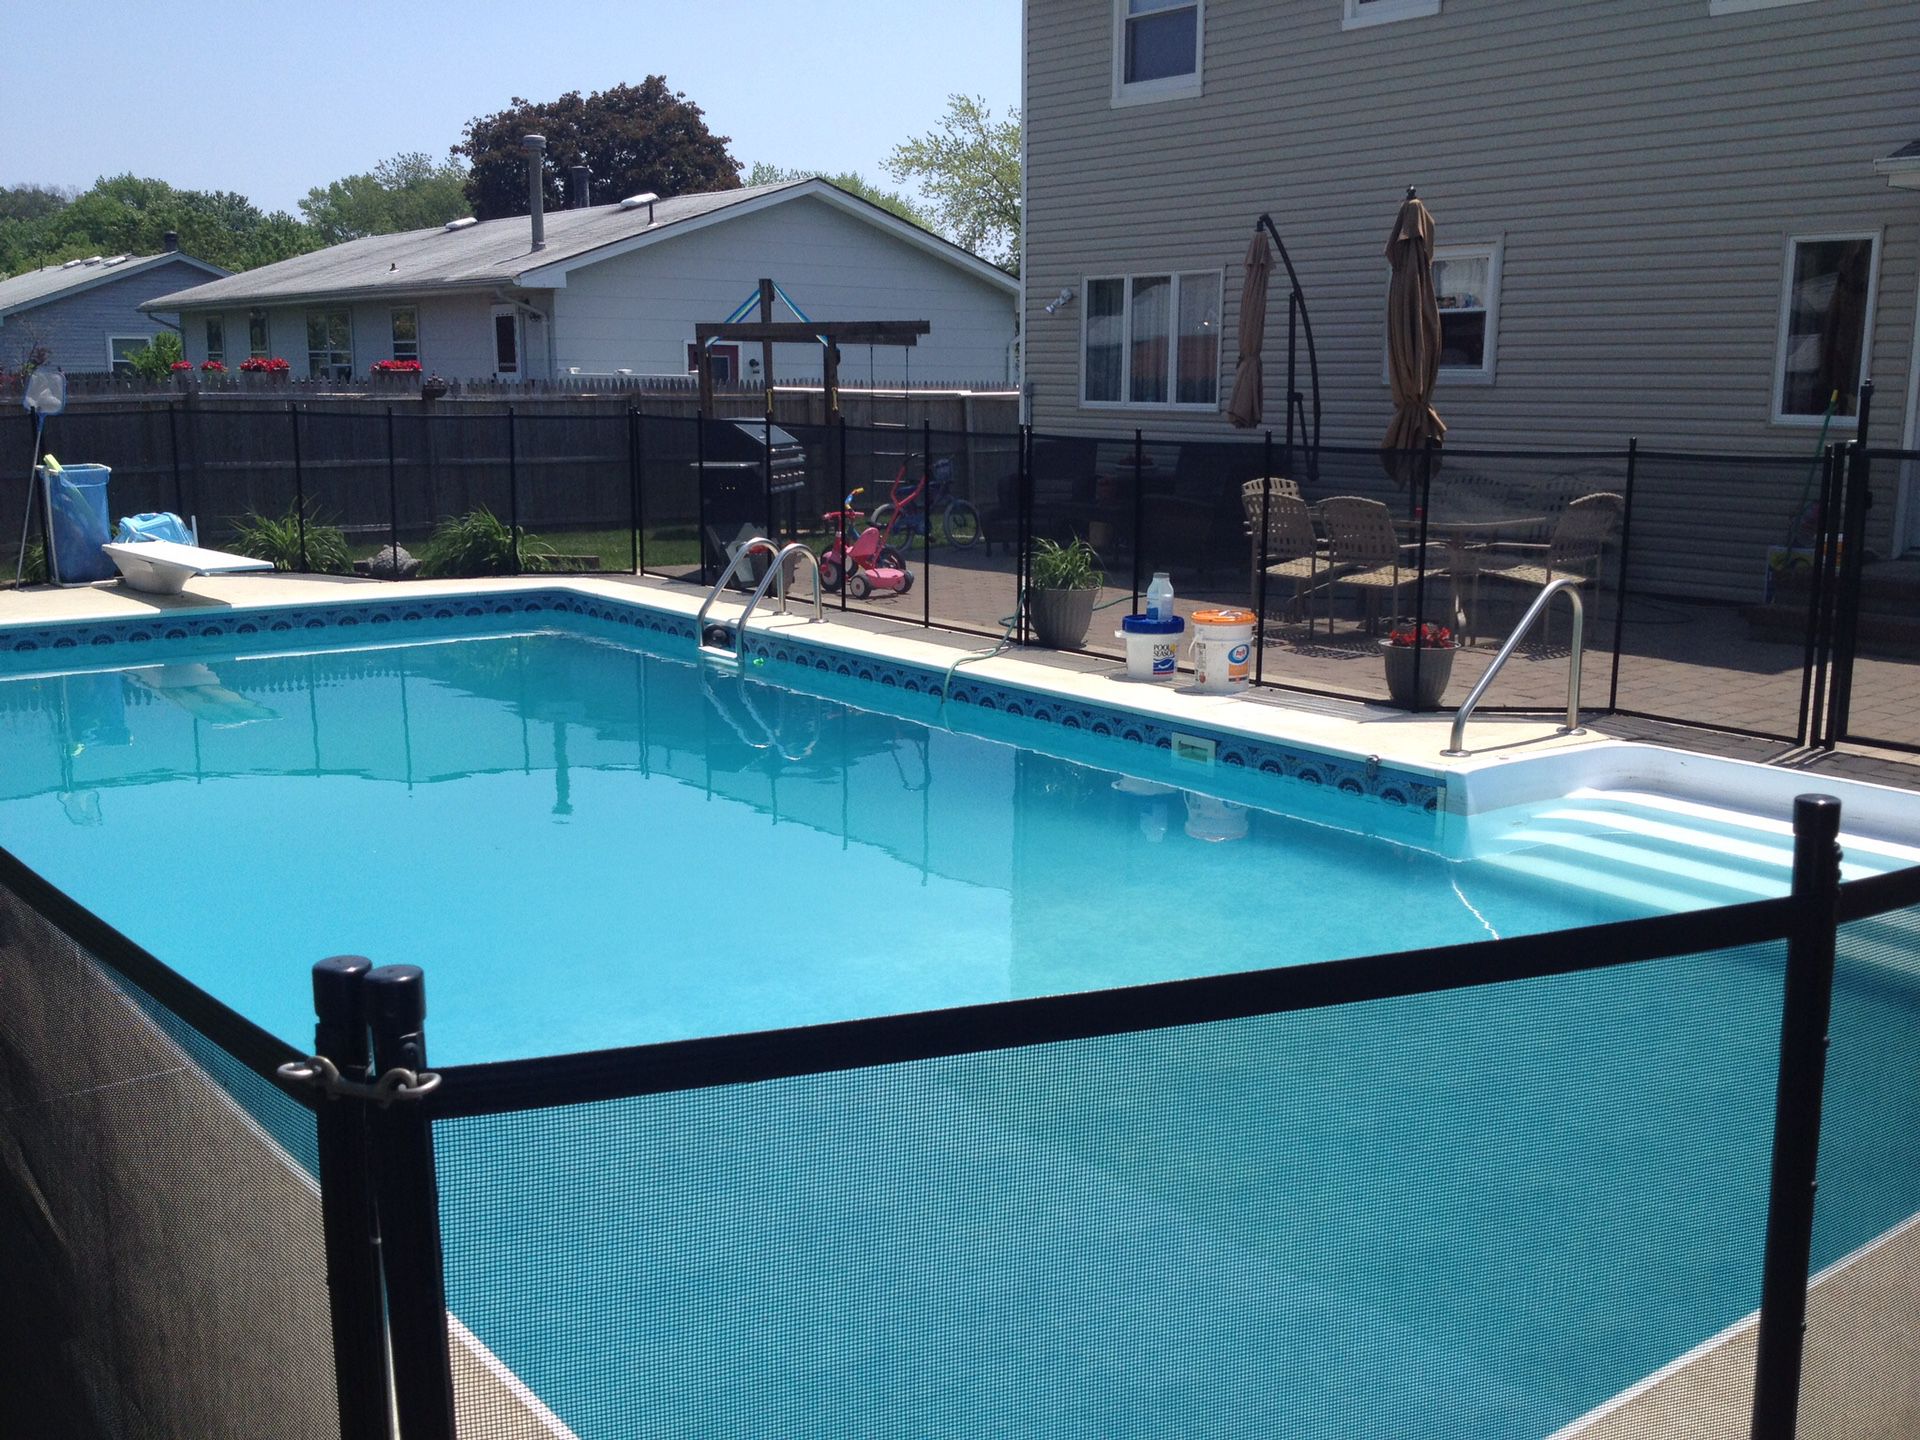 Complete pool safety fence and gate.